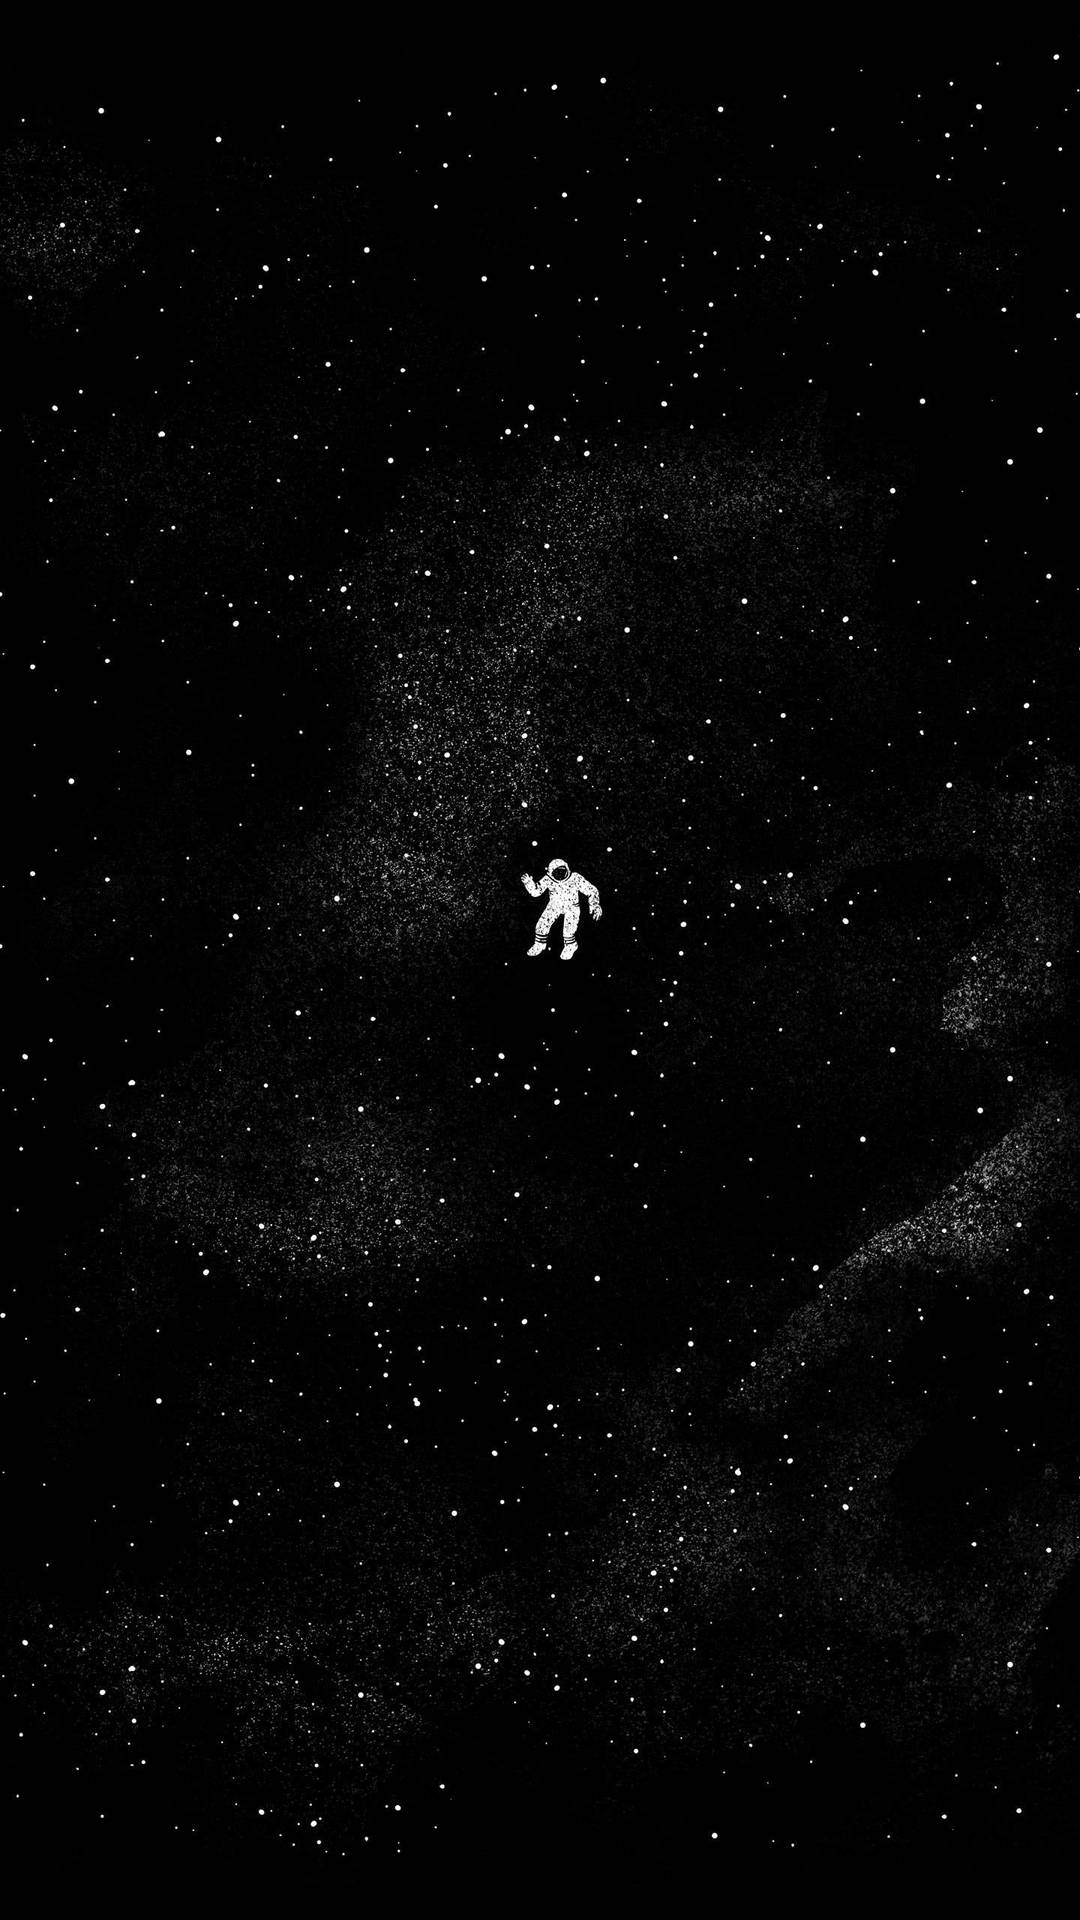 Astronaut Aesthetic In Black Space Background